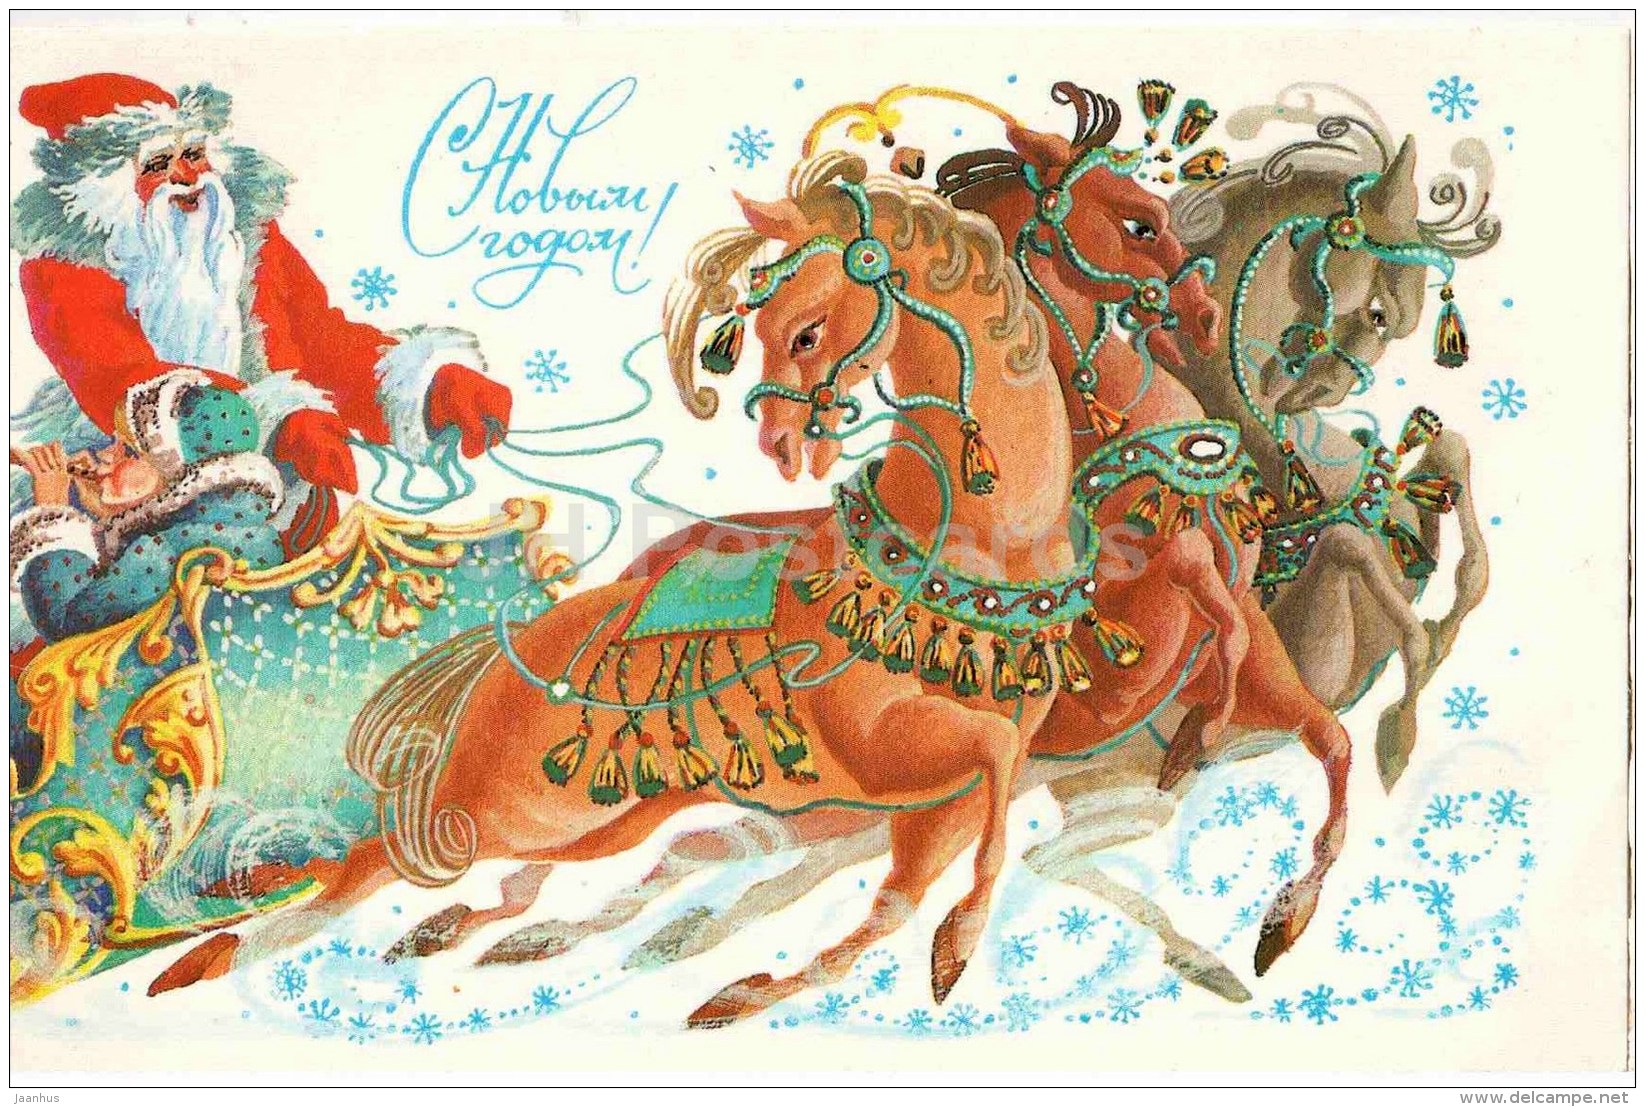 New Year greeting card by L. Pokhitonova - horse sledge - musicians - pipe - Ded Moroz - 1984 - Russia USSR - unused - JH Postcards